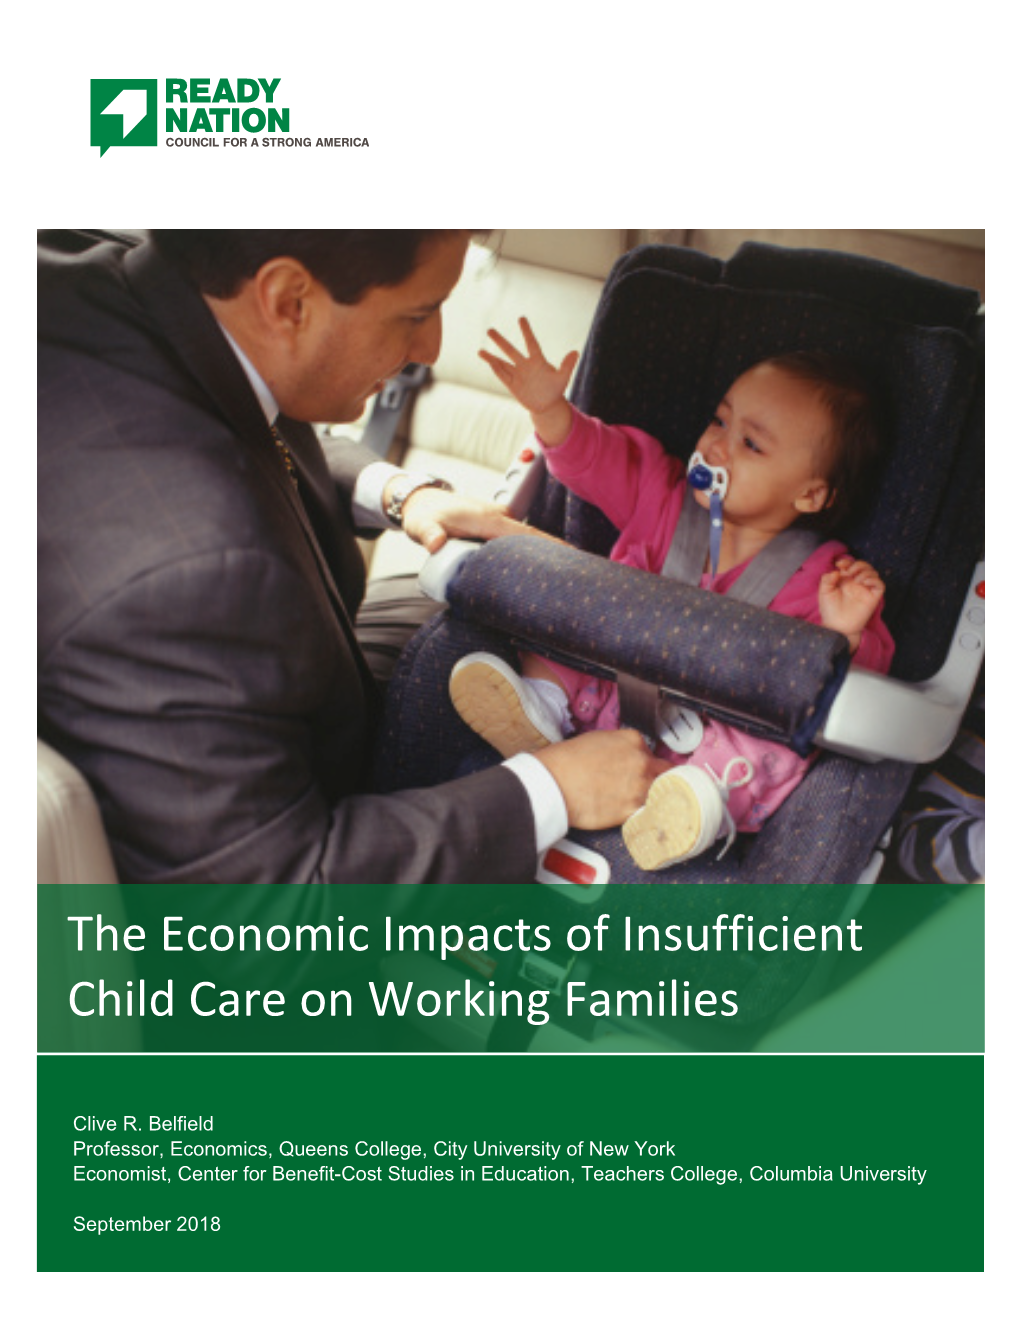 The Economic Impacts of Insufficient Child Care on Working Families